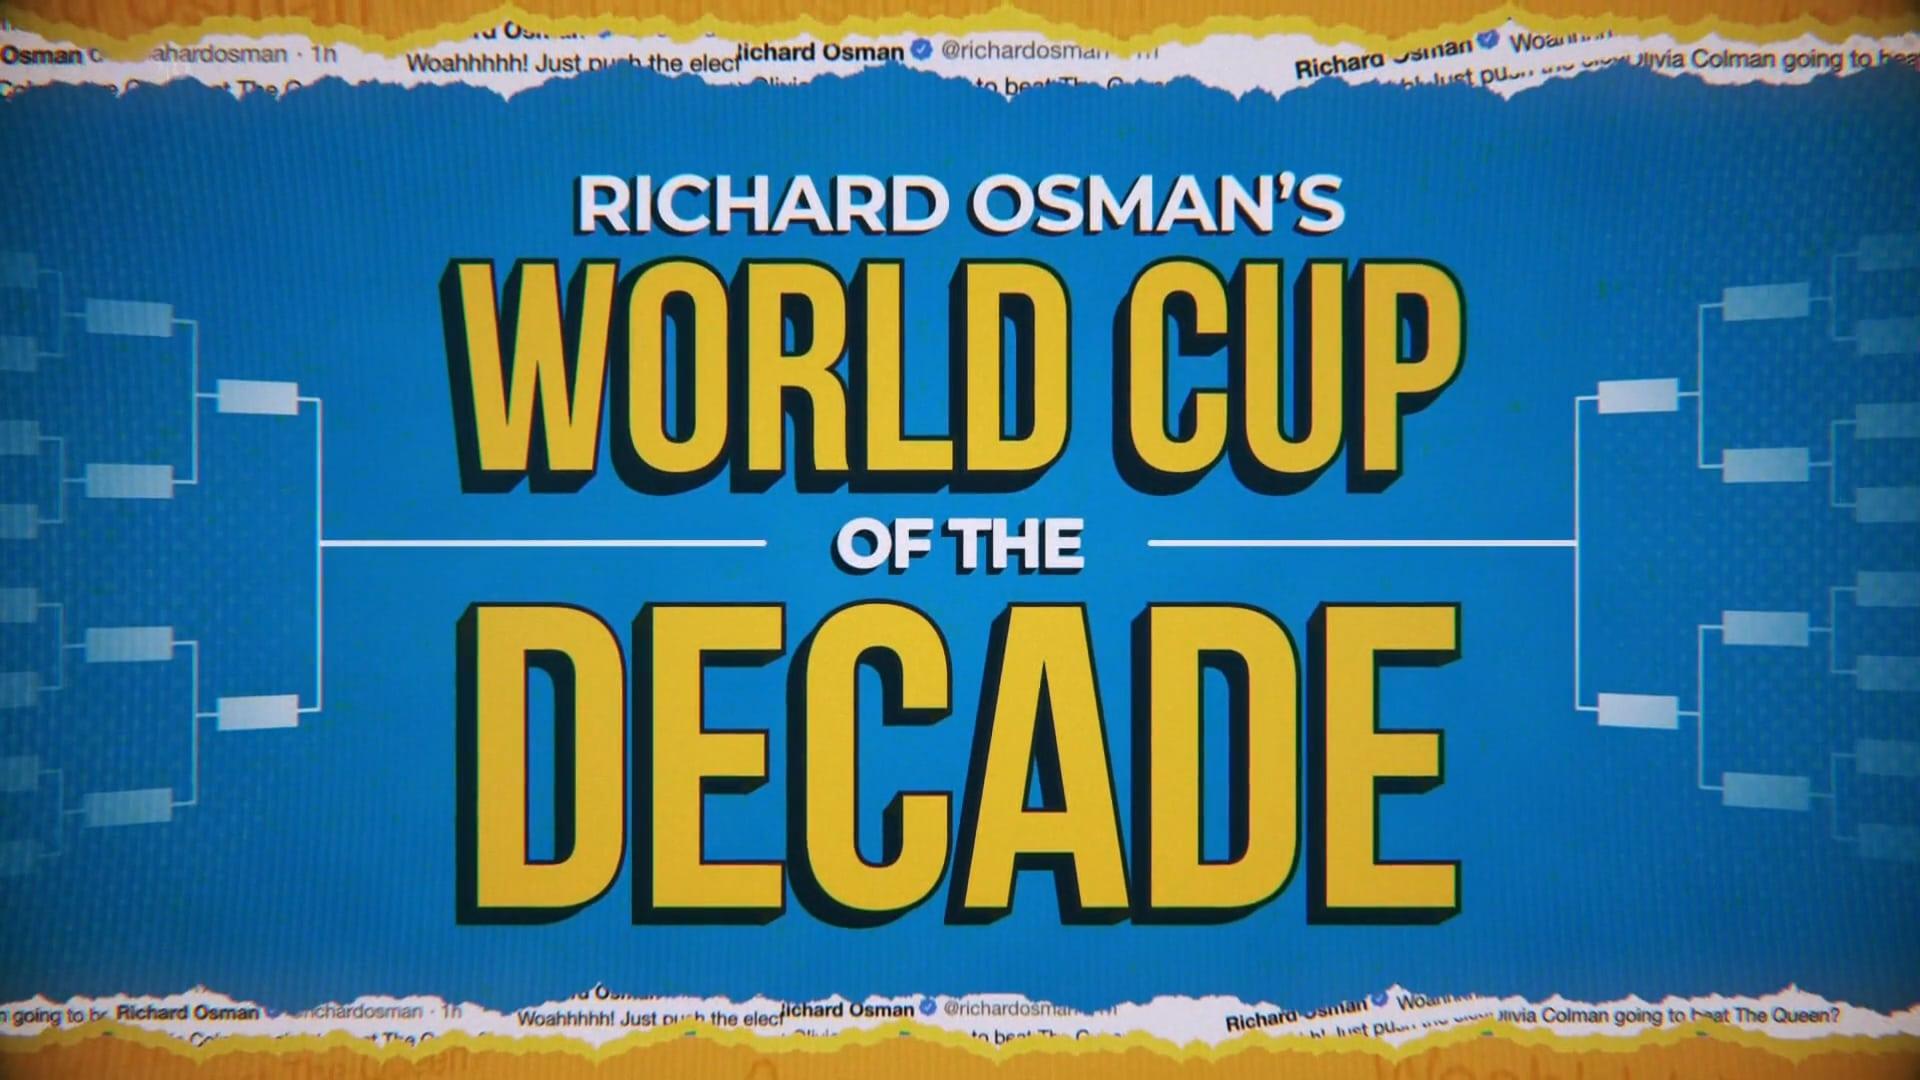 Richard Osman's World Cup of the Decade backdrop